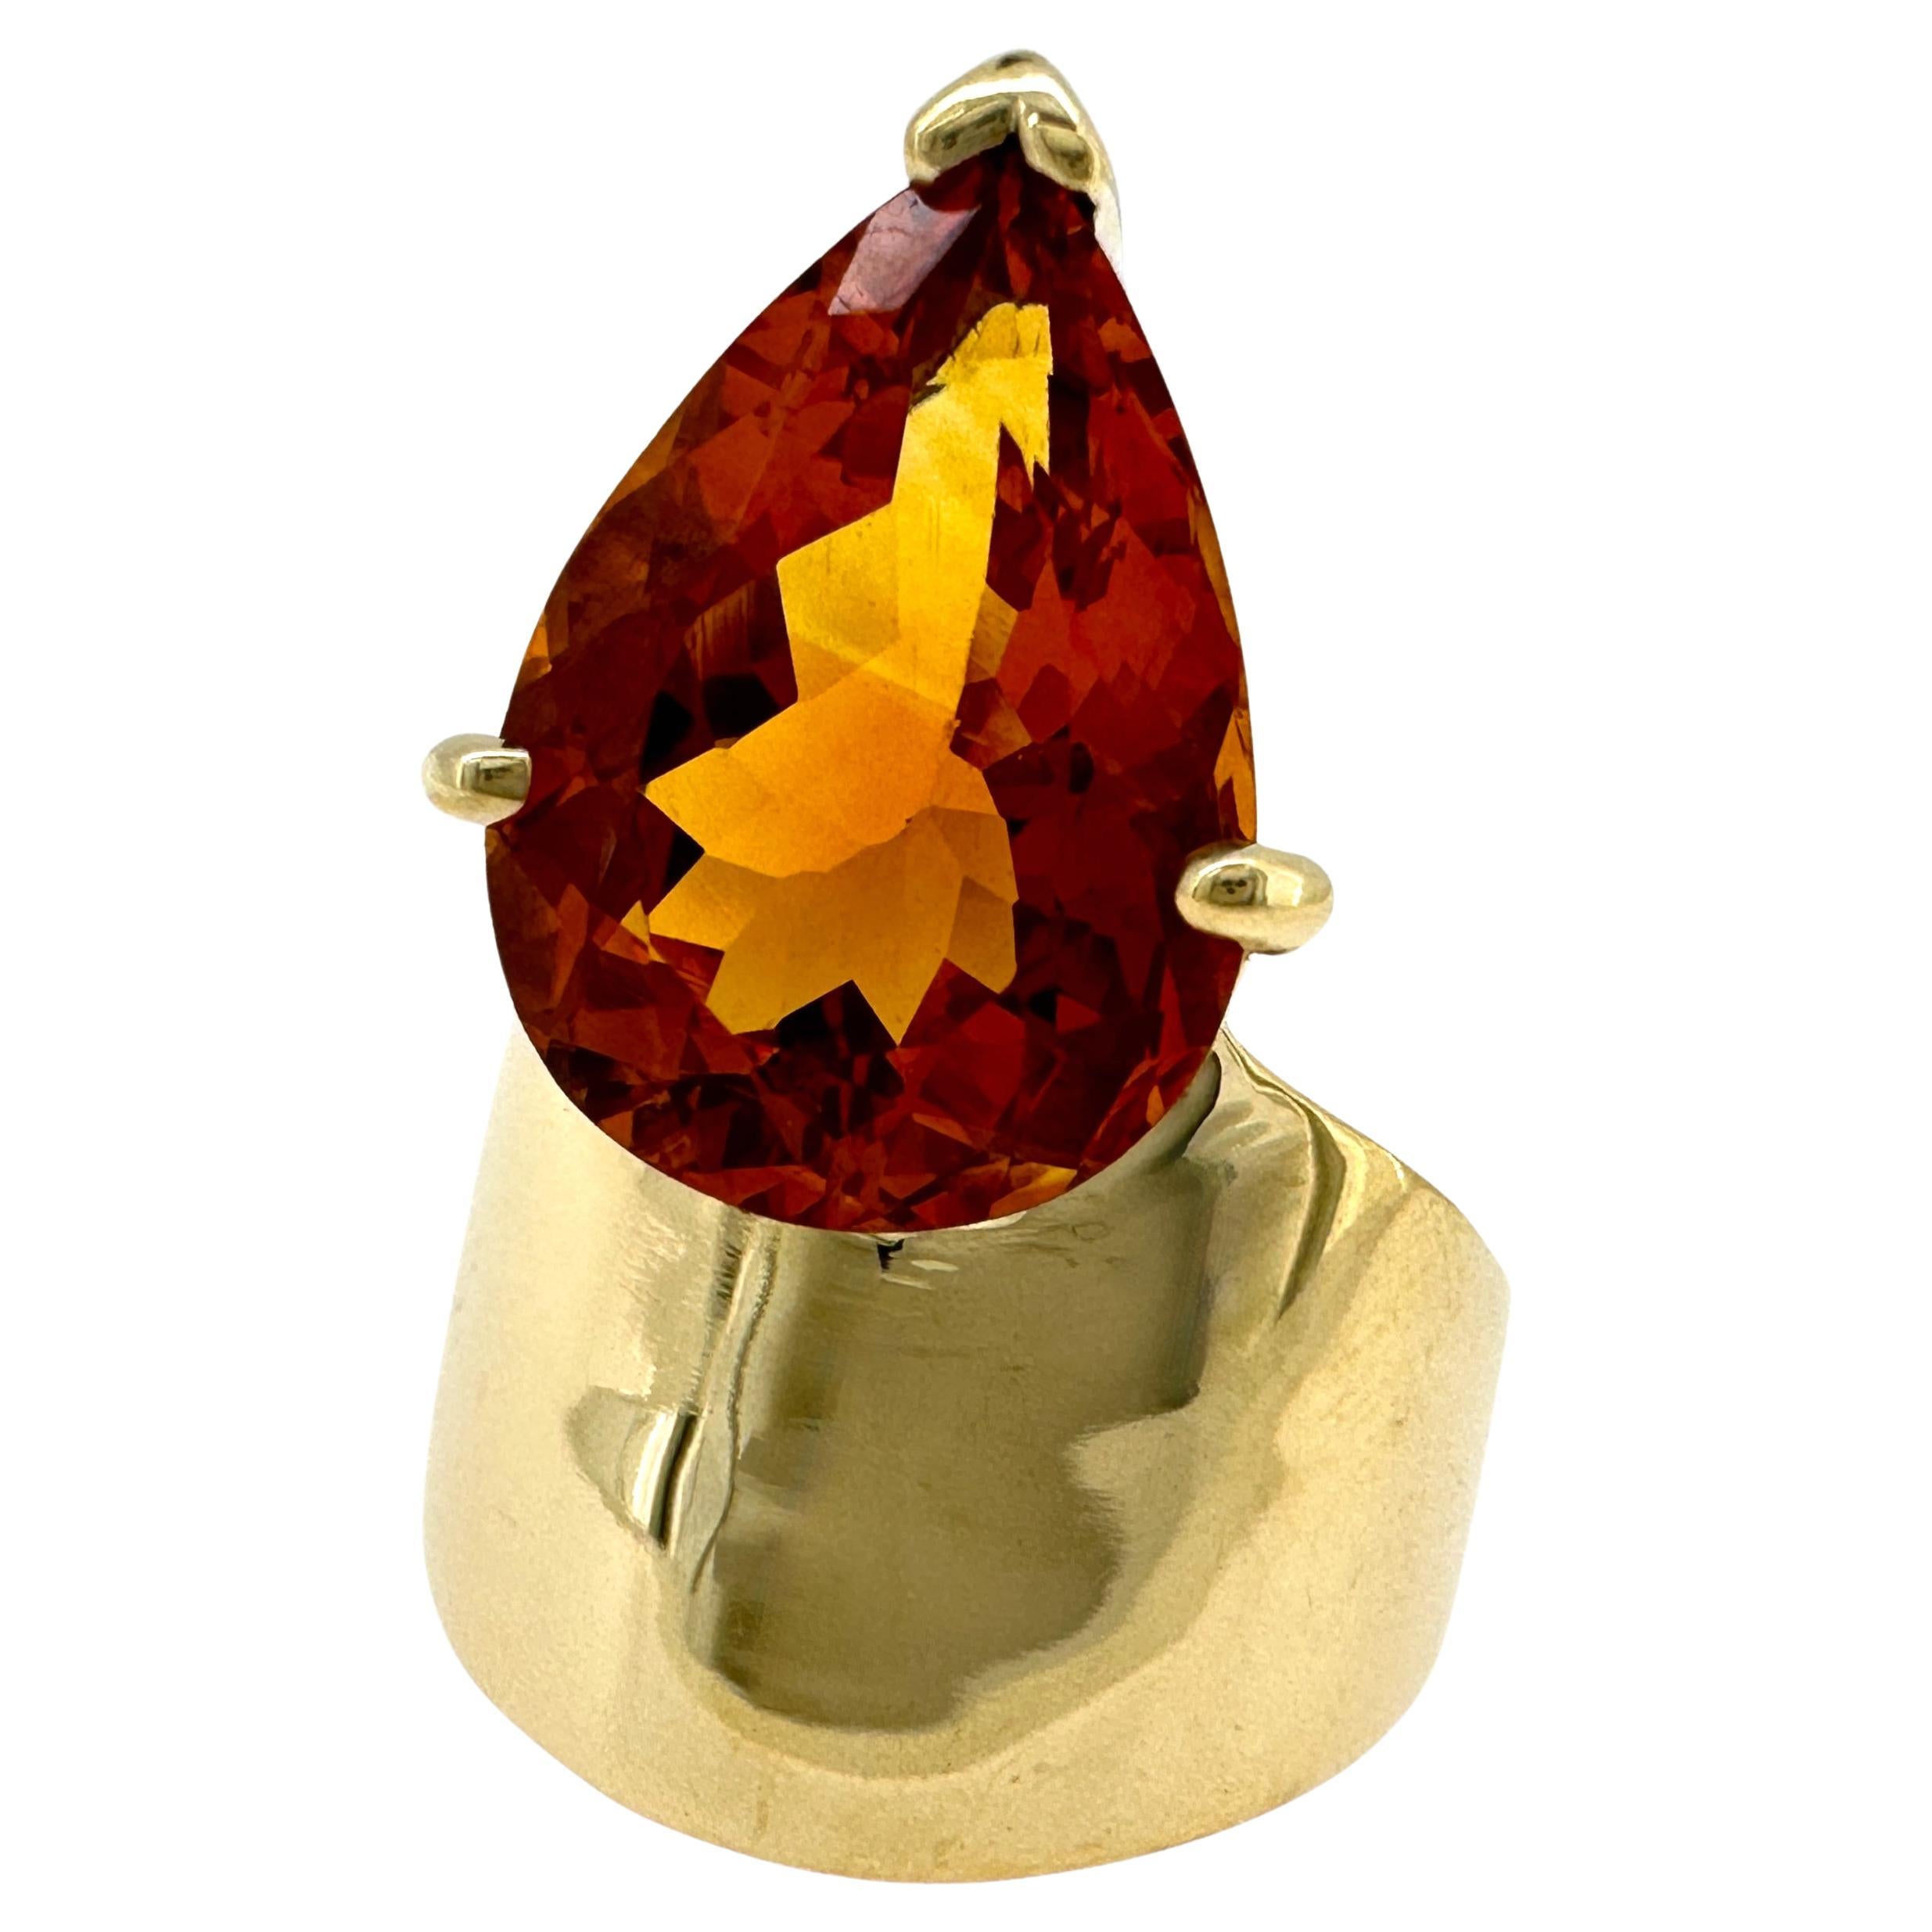 "Citrine Sailboat" Ring in Yellow Gold with Pear-Shaped 7 Carat Madeira Citrine For Sale